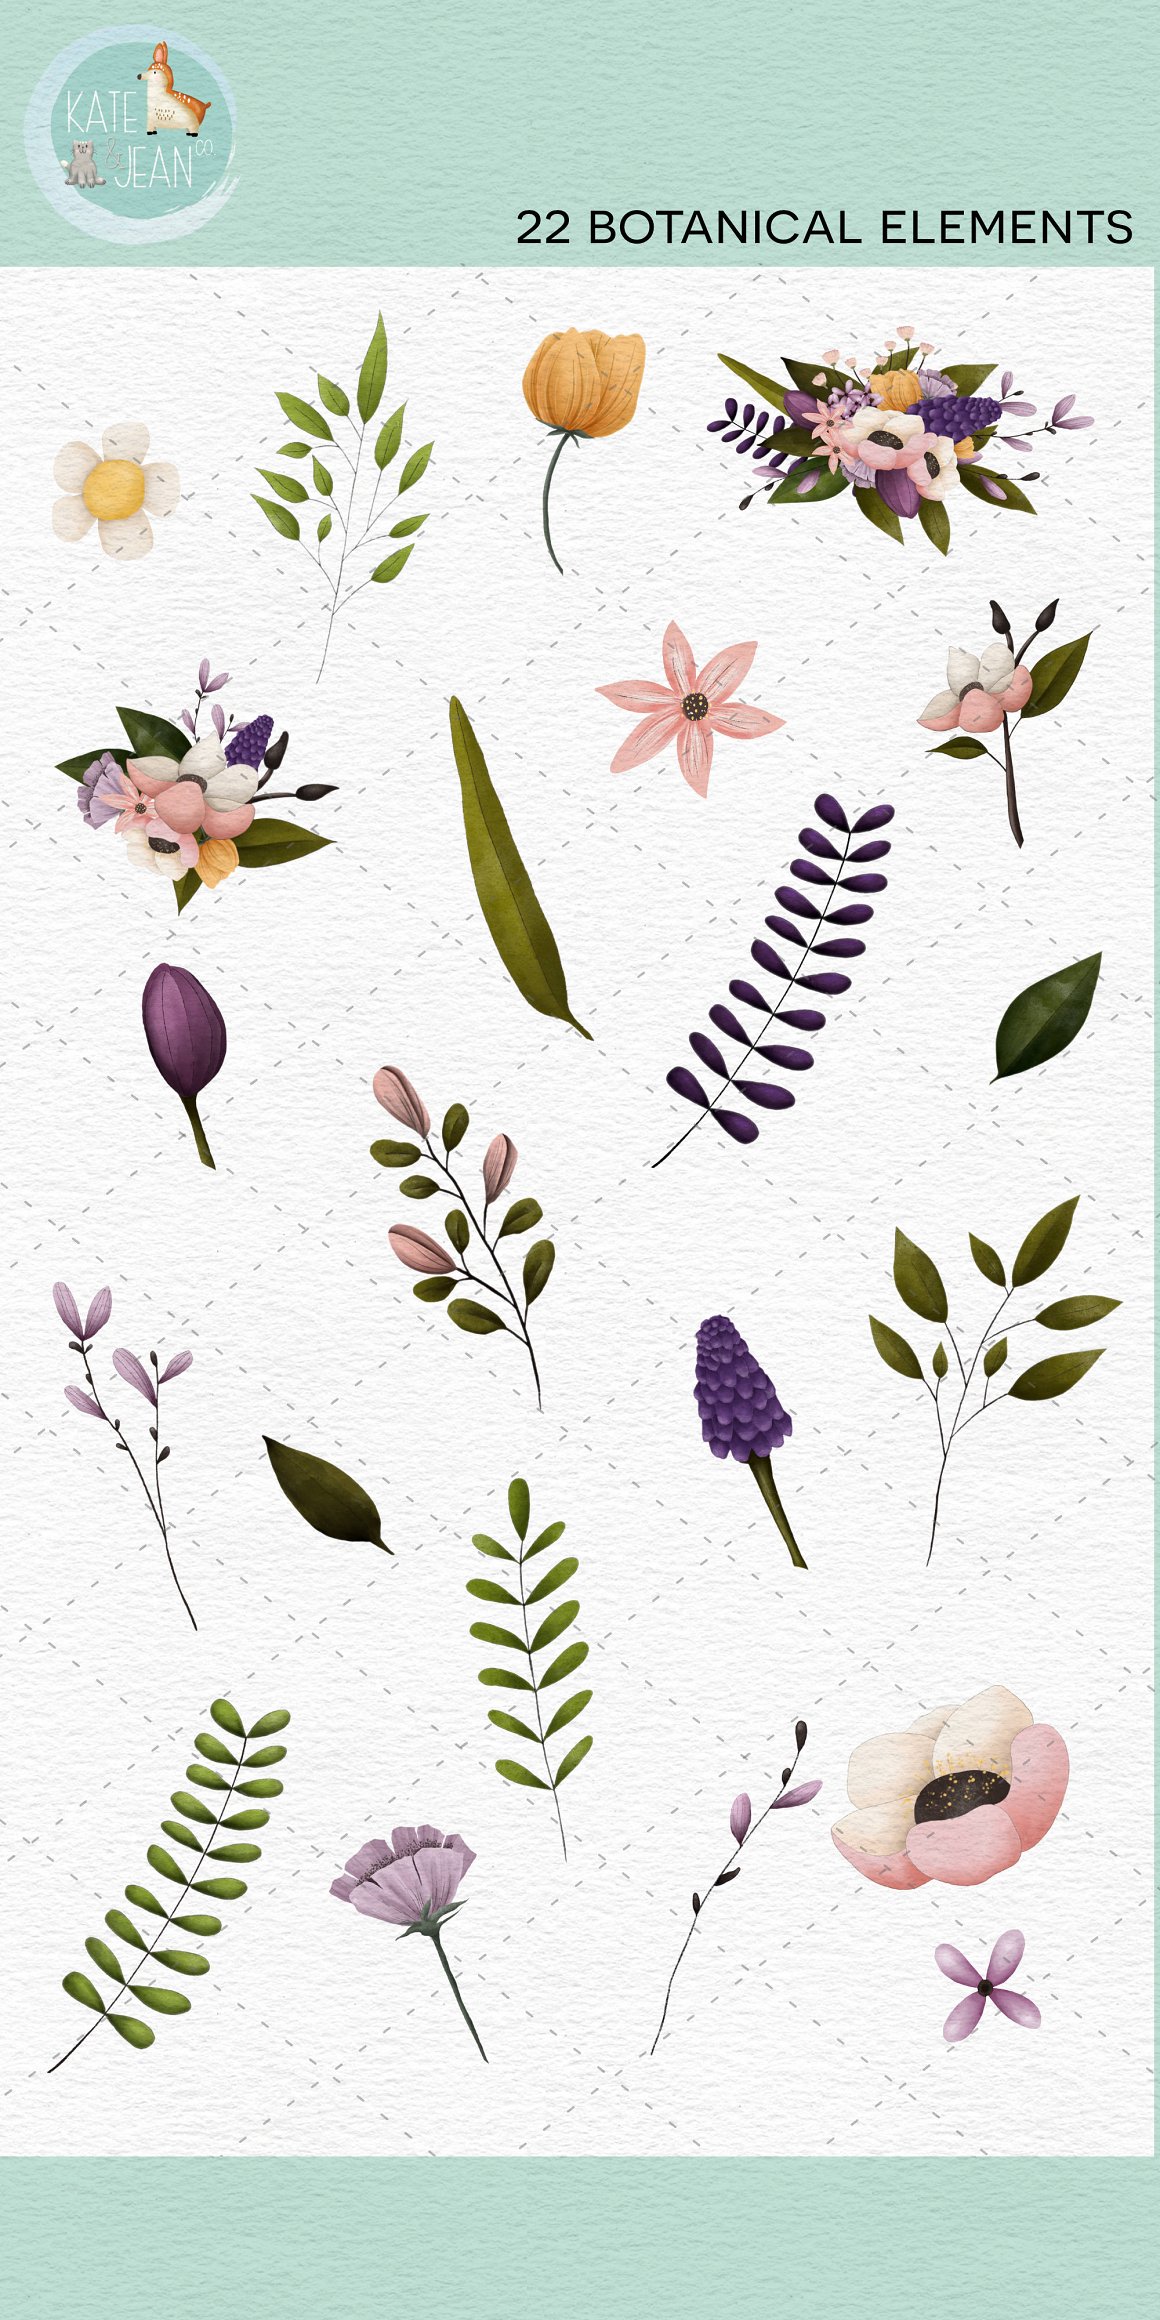 A set of 22 different botanical elements on a white background.